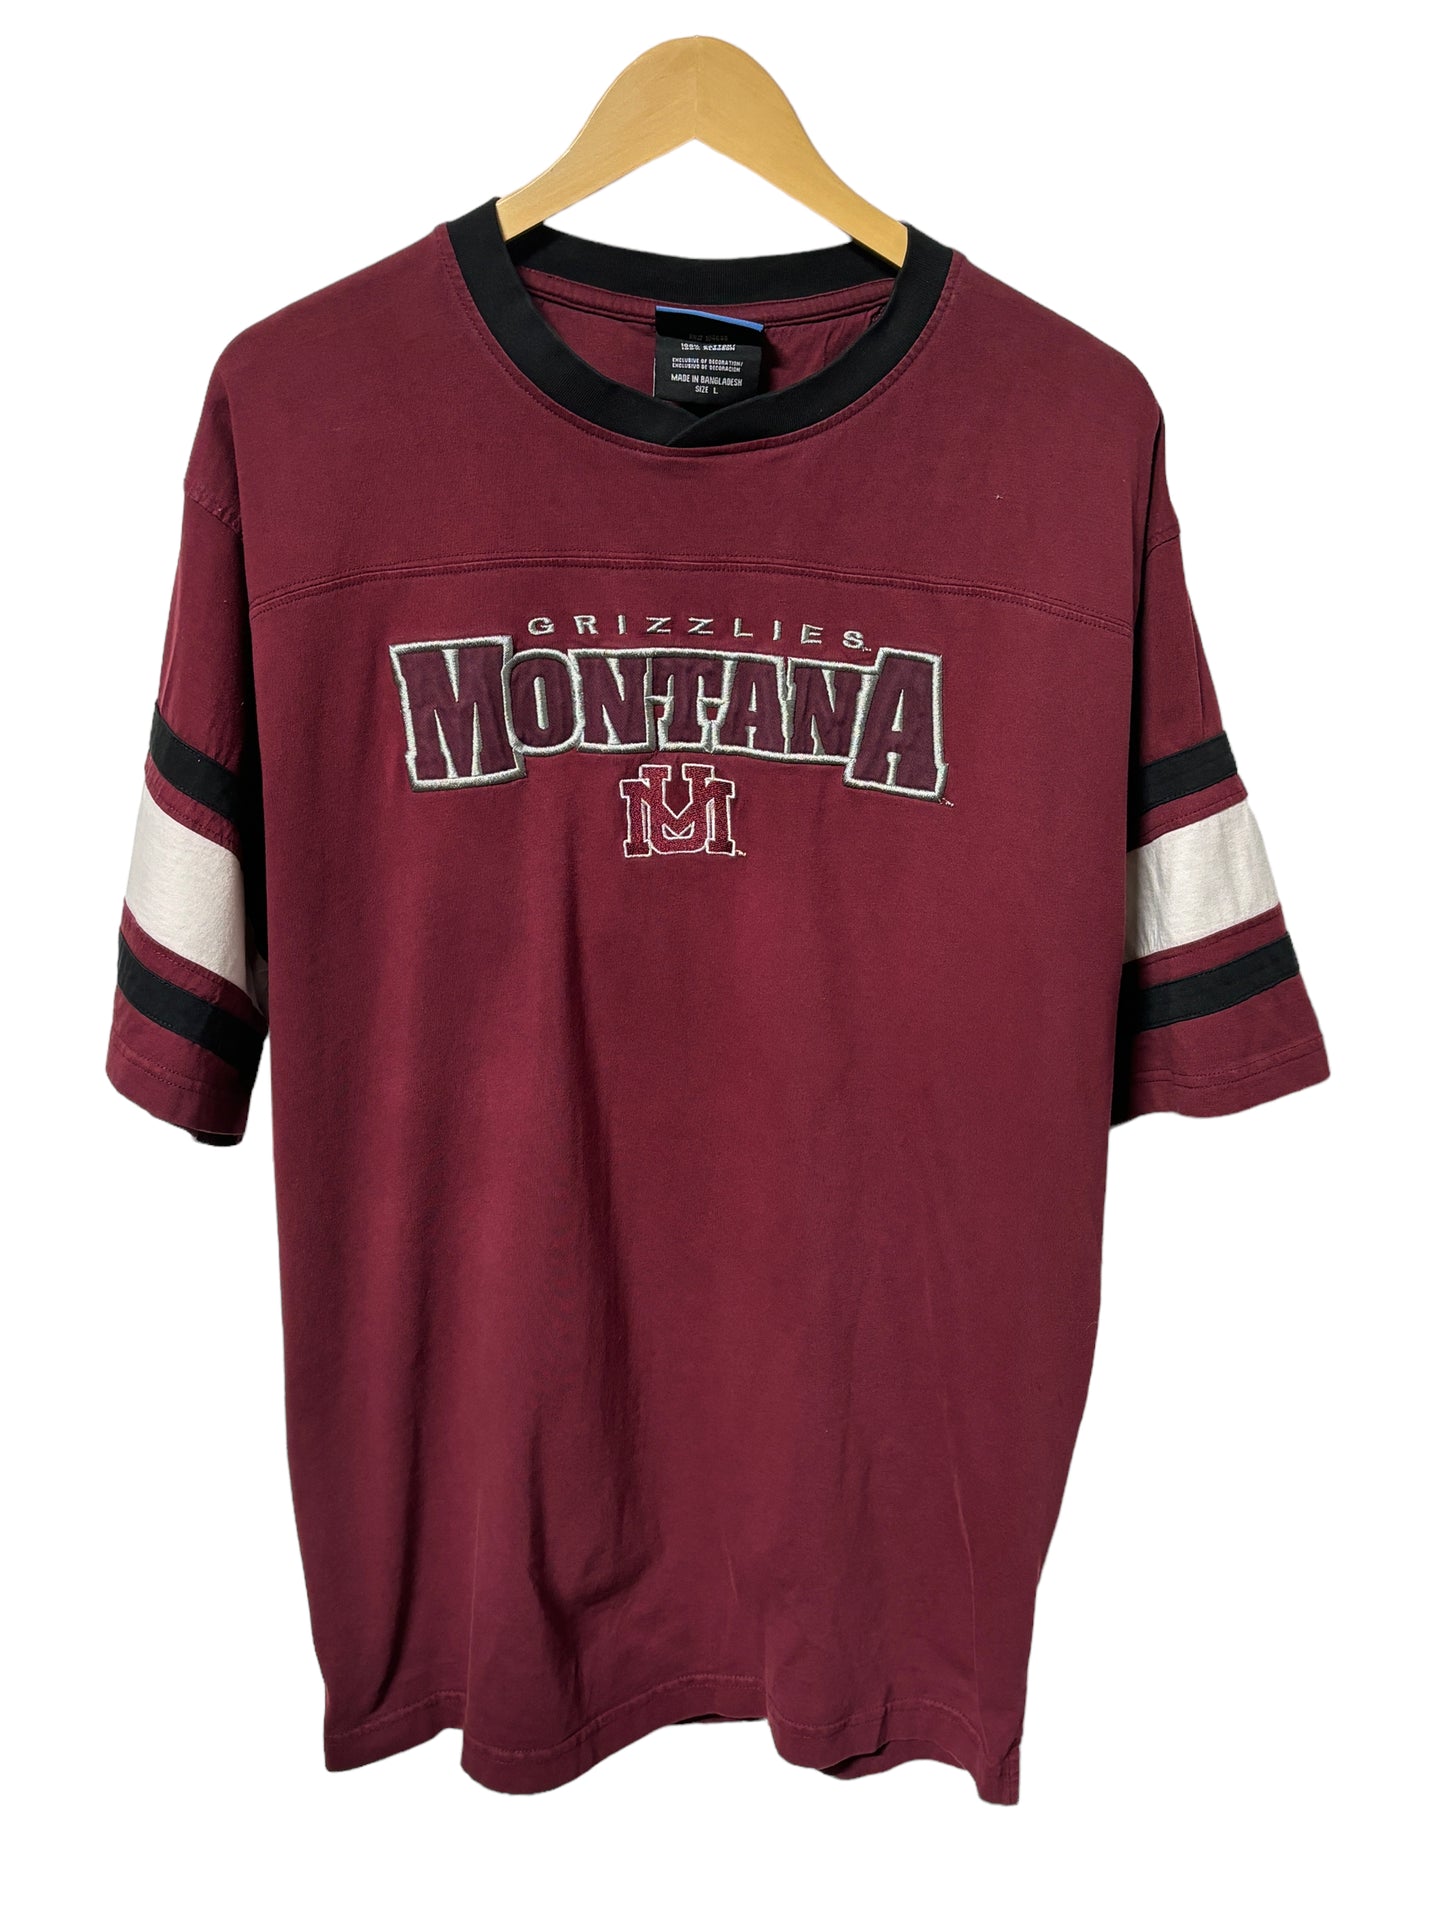 Vintage 00's University of Montana Grizzlies Graphic Tee Size Large